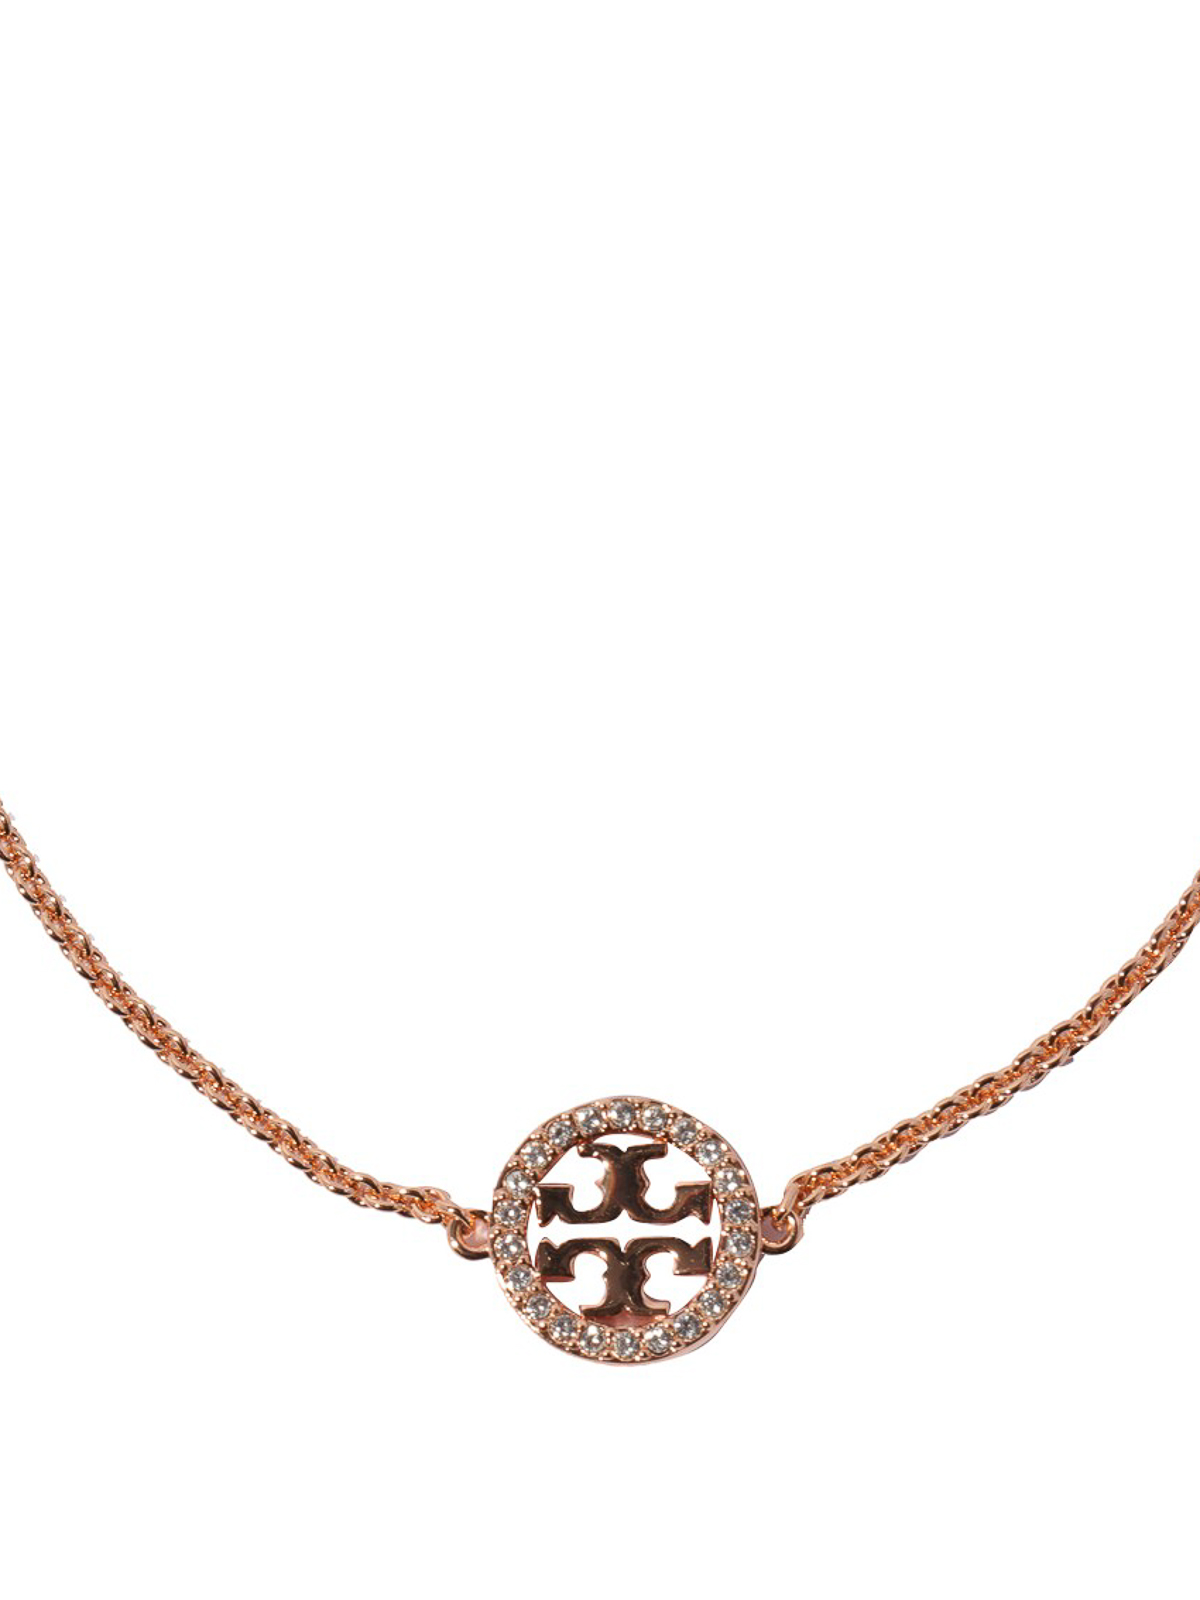 Necklaces & Chokers Tory Burch - Gold tone necklace with charm and crystals  - 80997696